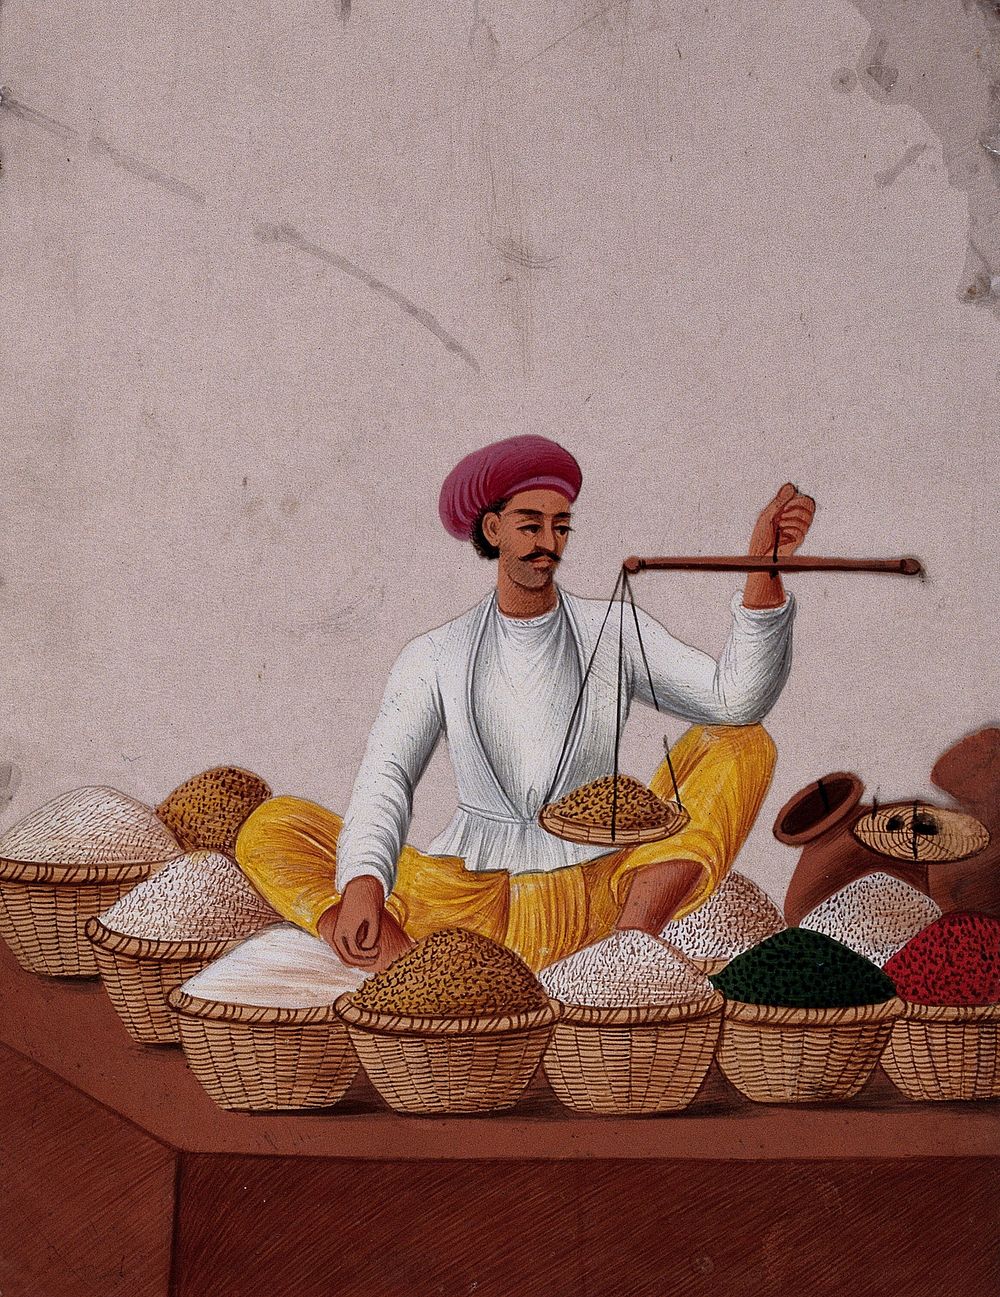 A shopkeeper weighing pulses . Gouache painting on mica by an Indian artist.